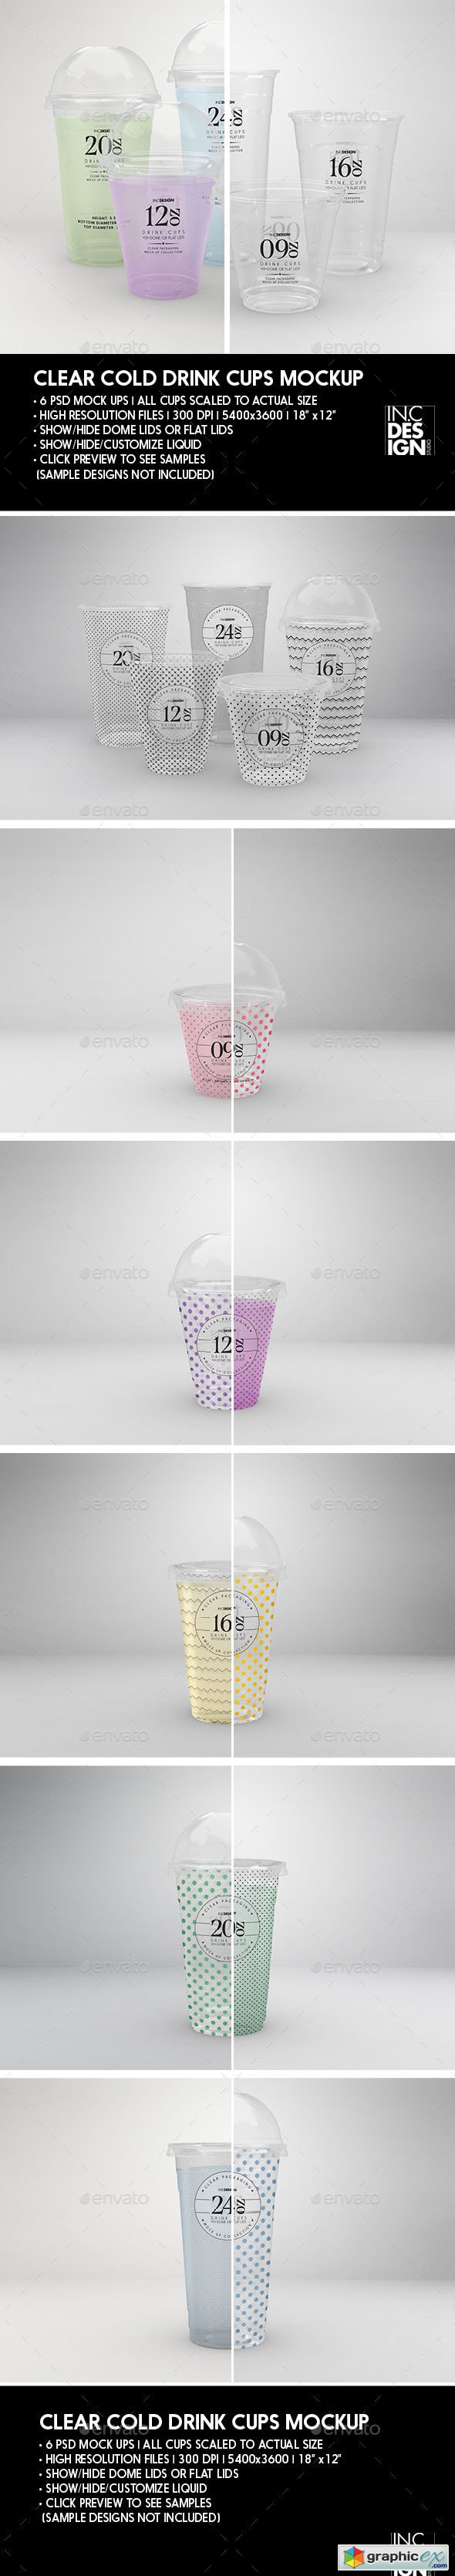 Clear Cold Drink Cups Packaging Mock Up